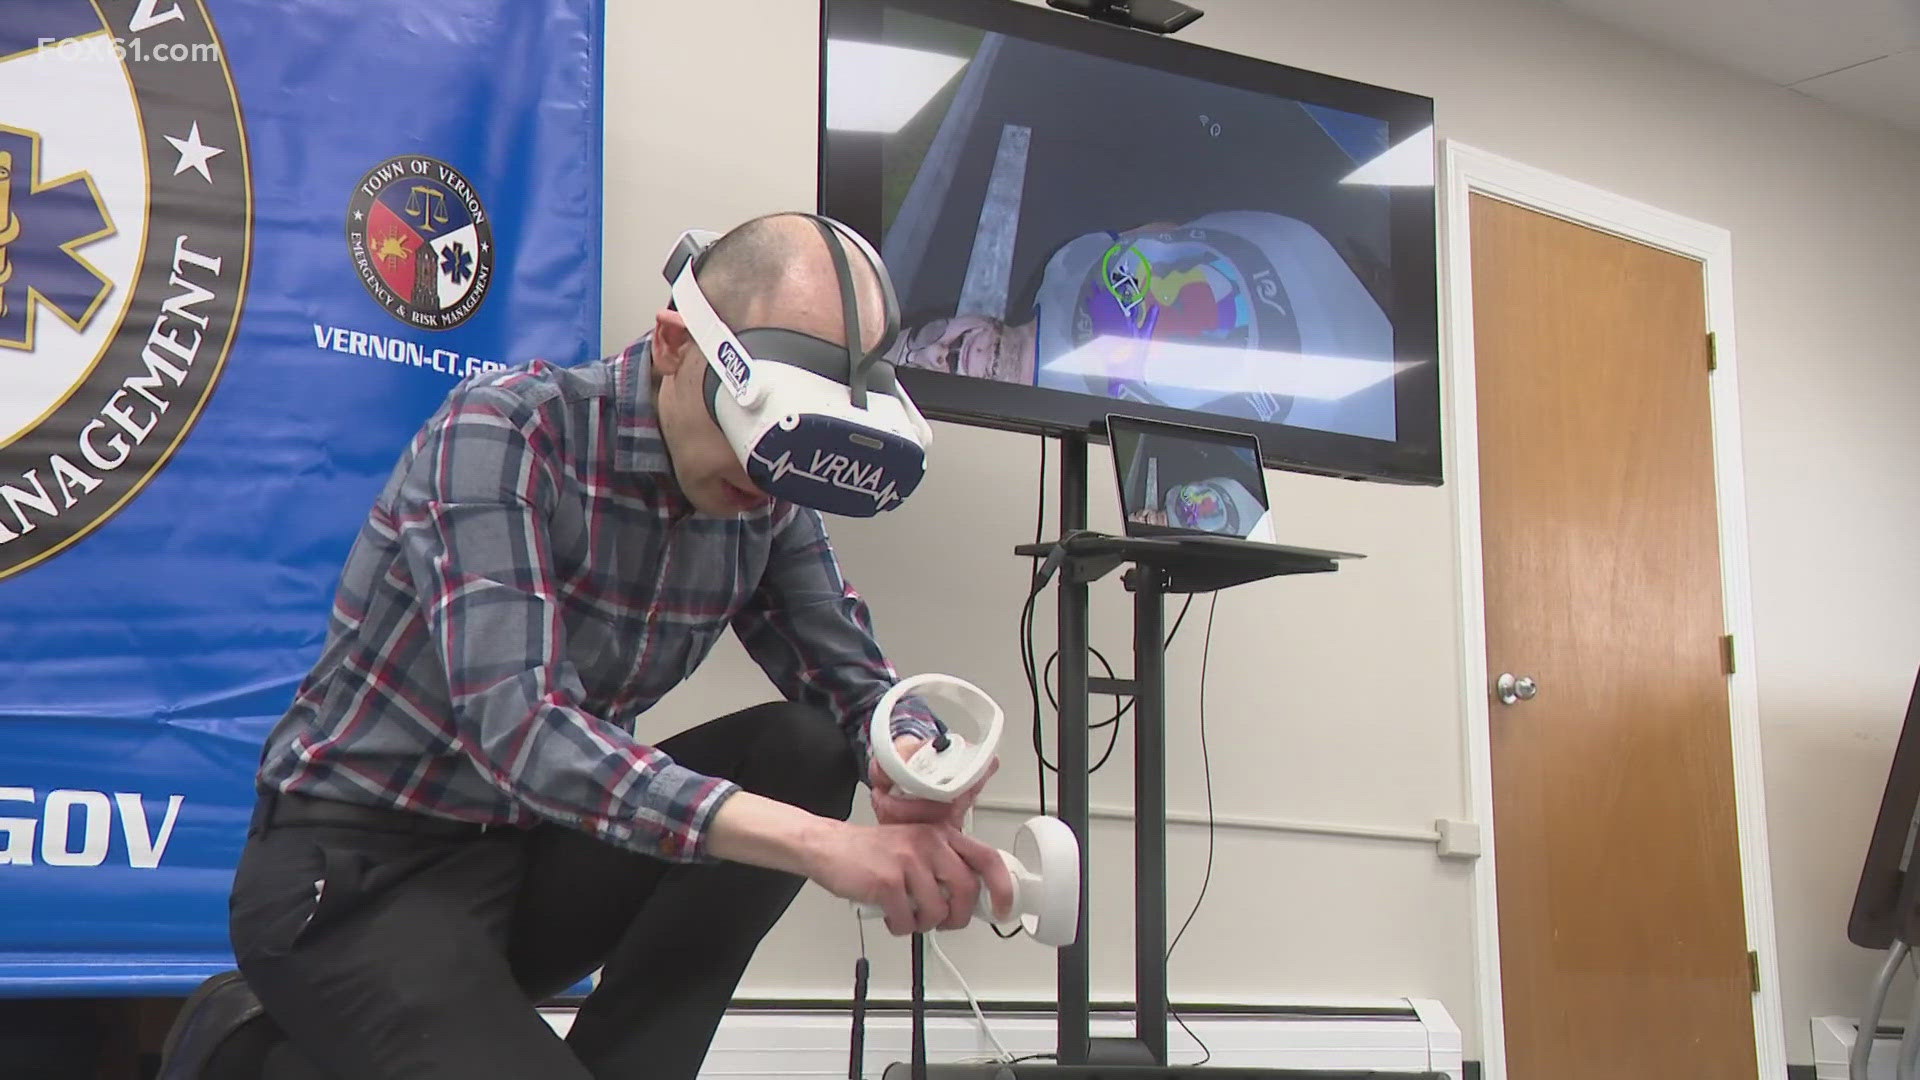 The system, created by nearby East Hartford-based VRSim, uses a virtual reality system to better train first responders for an array of medical incidents.